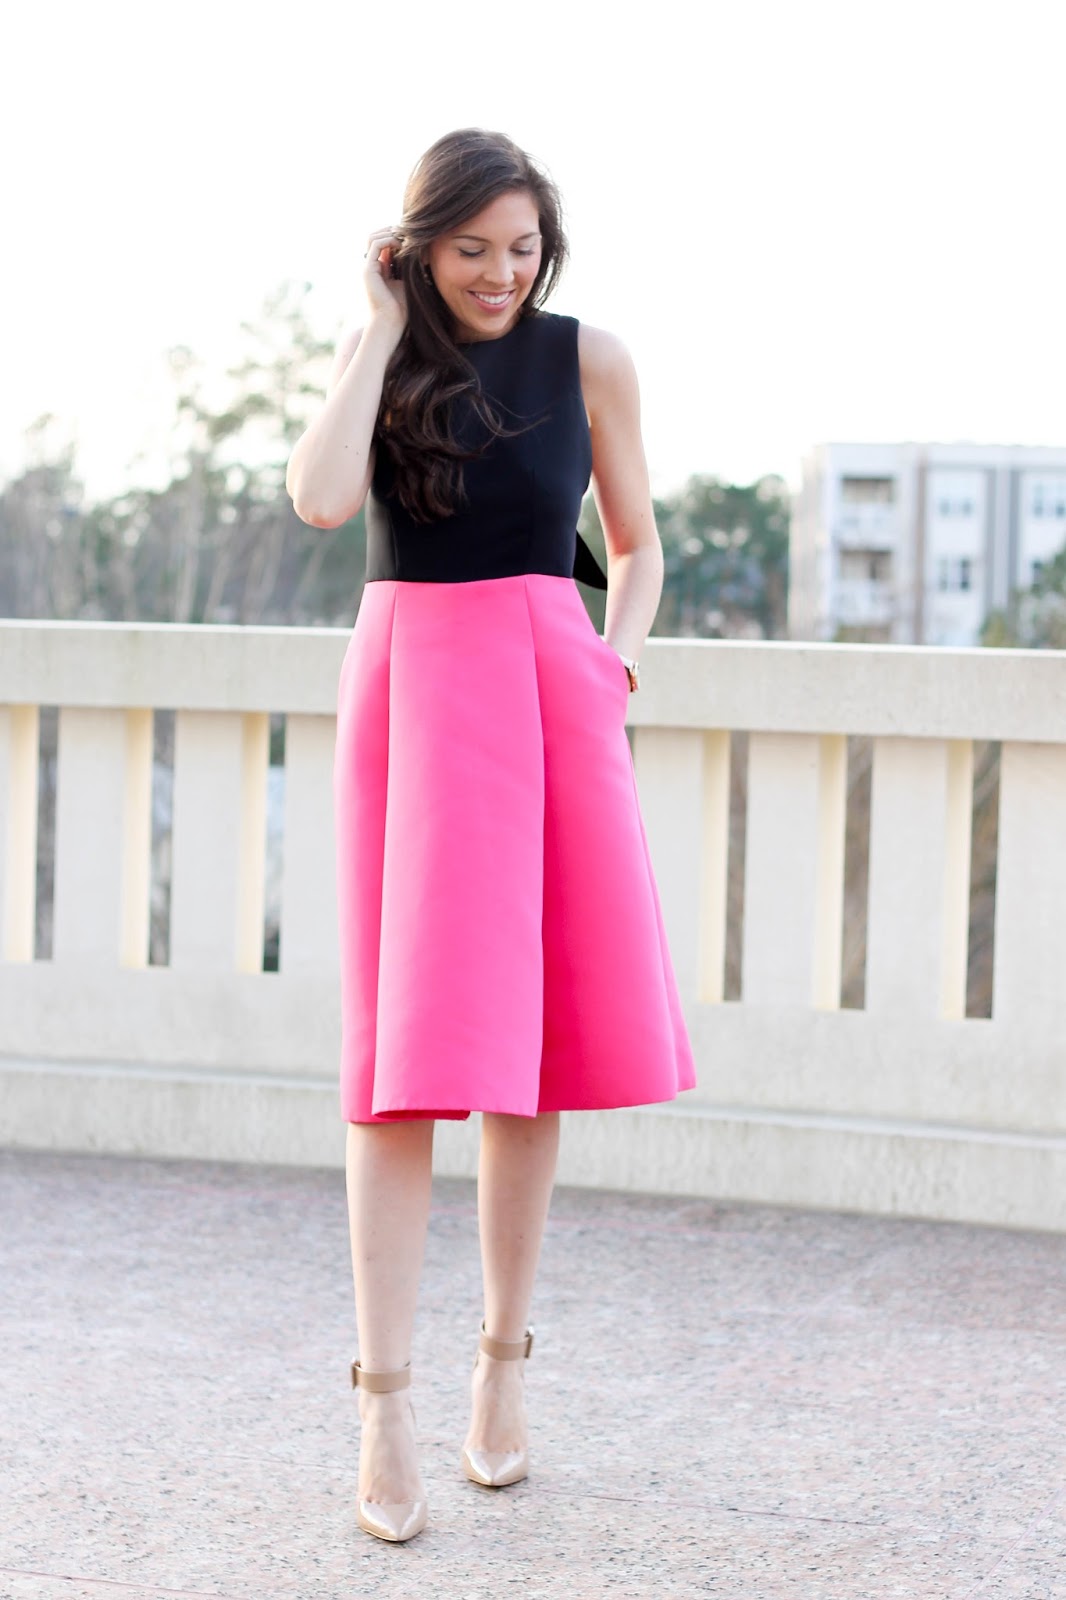 Kate Spade Bow back colorblock dress, Rent the Runway Valentine's dress, Rent the Runway wedding dress idea, NC Fashion Blogger, Stella Dot earrings, fossil tan leather watch with rose gold face, pretty in the pines blog